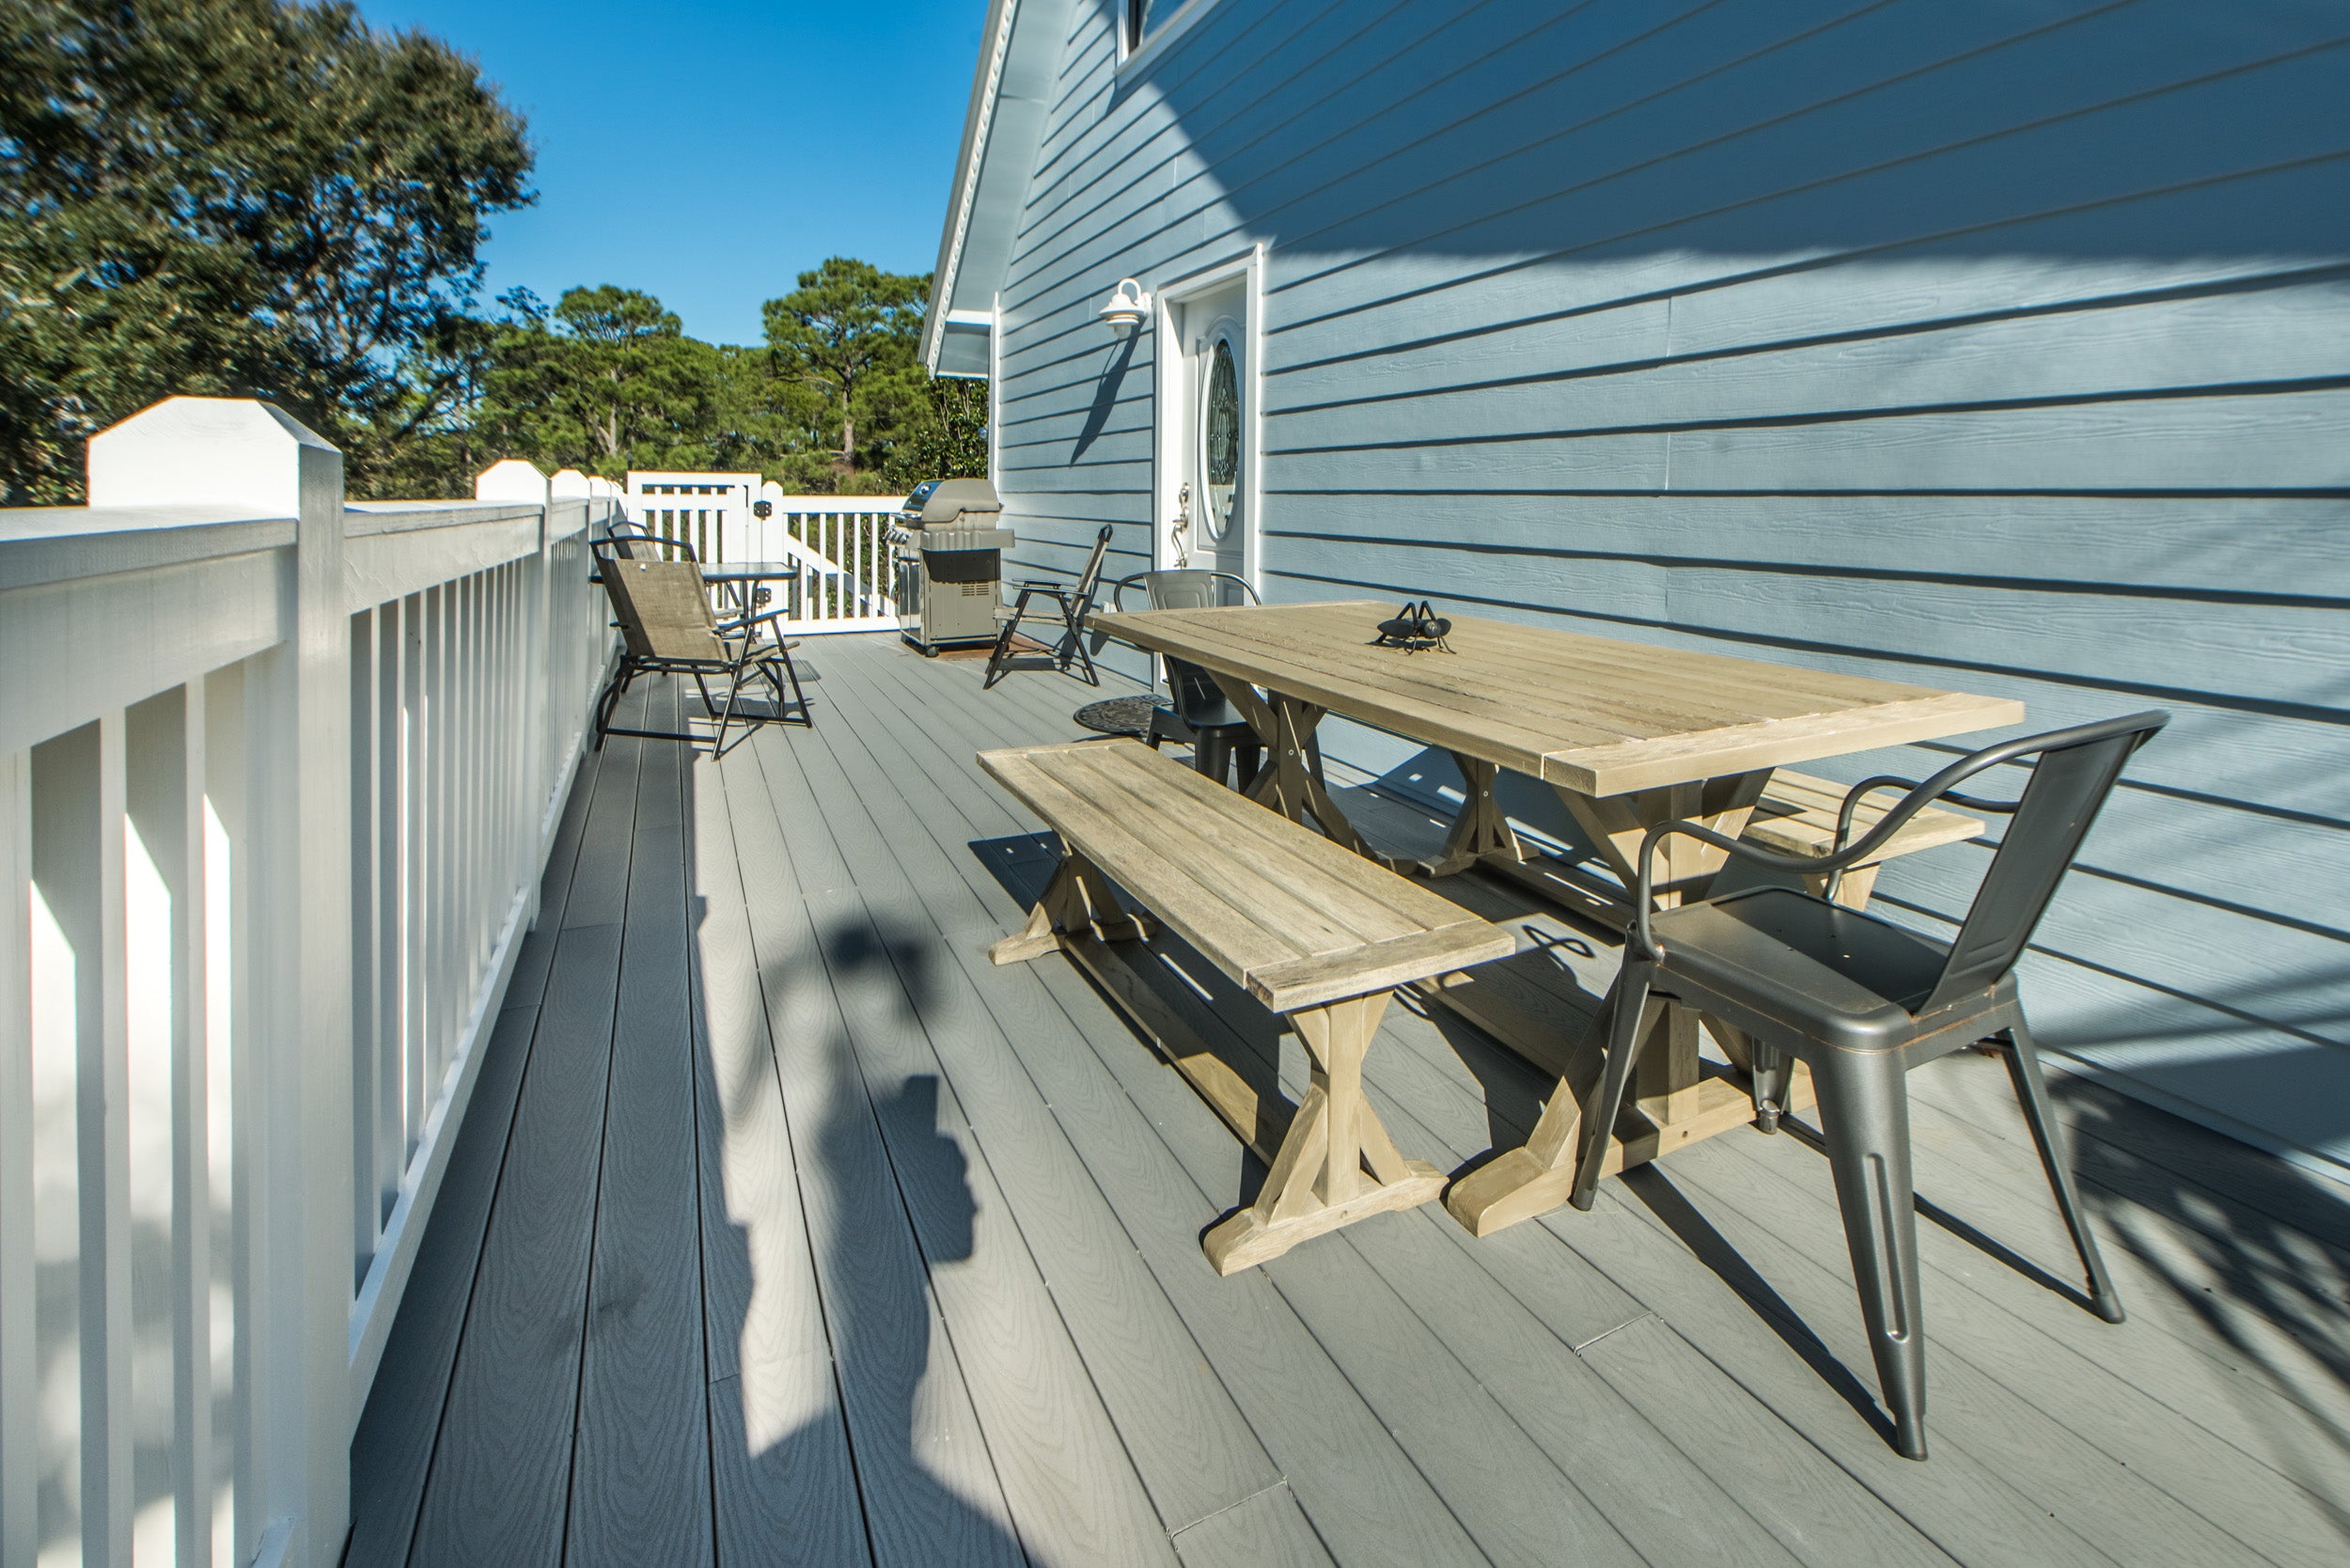 Picnic Table on Porch outside